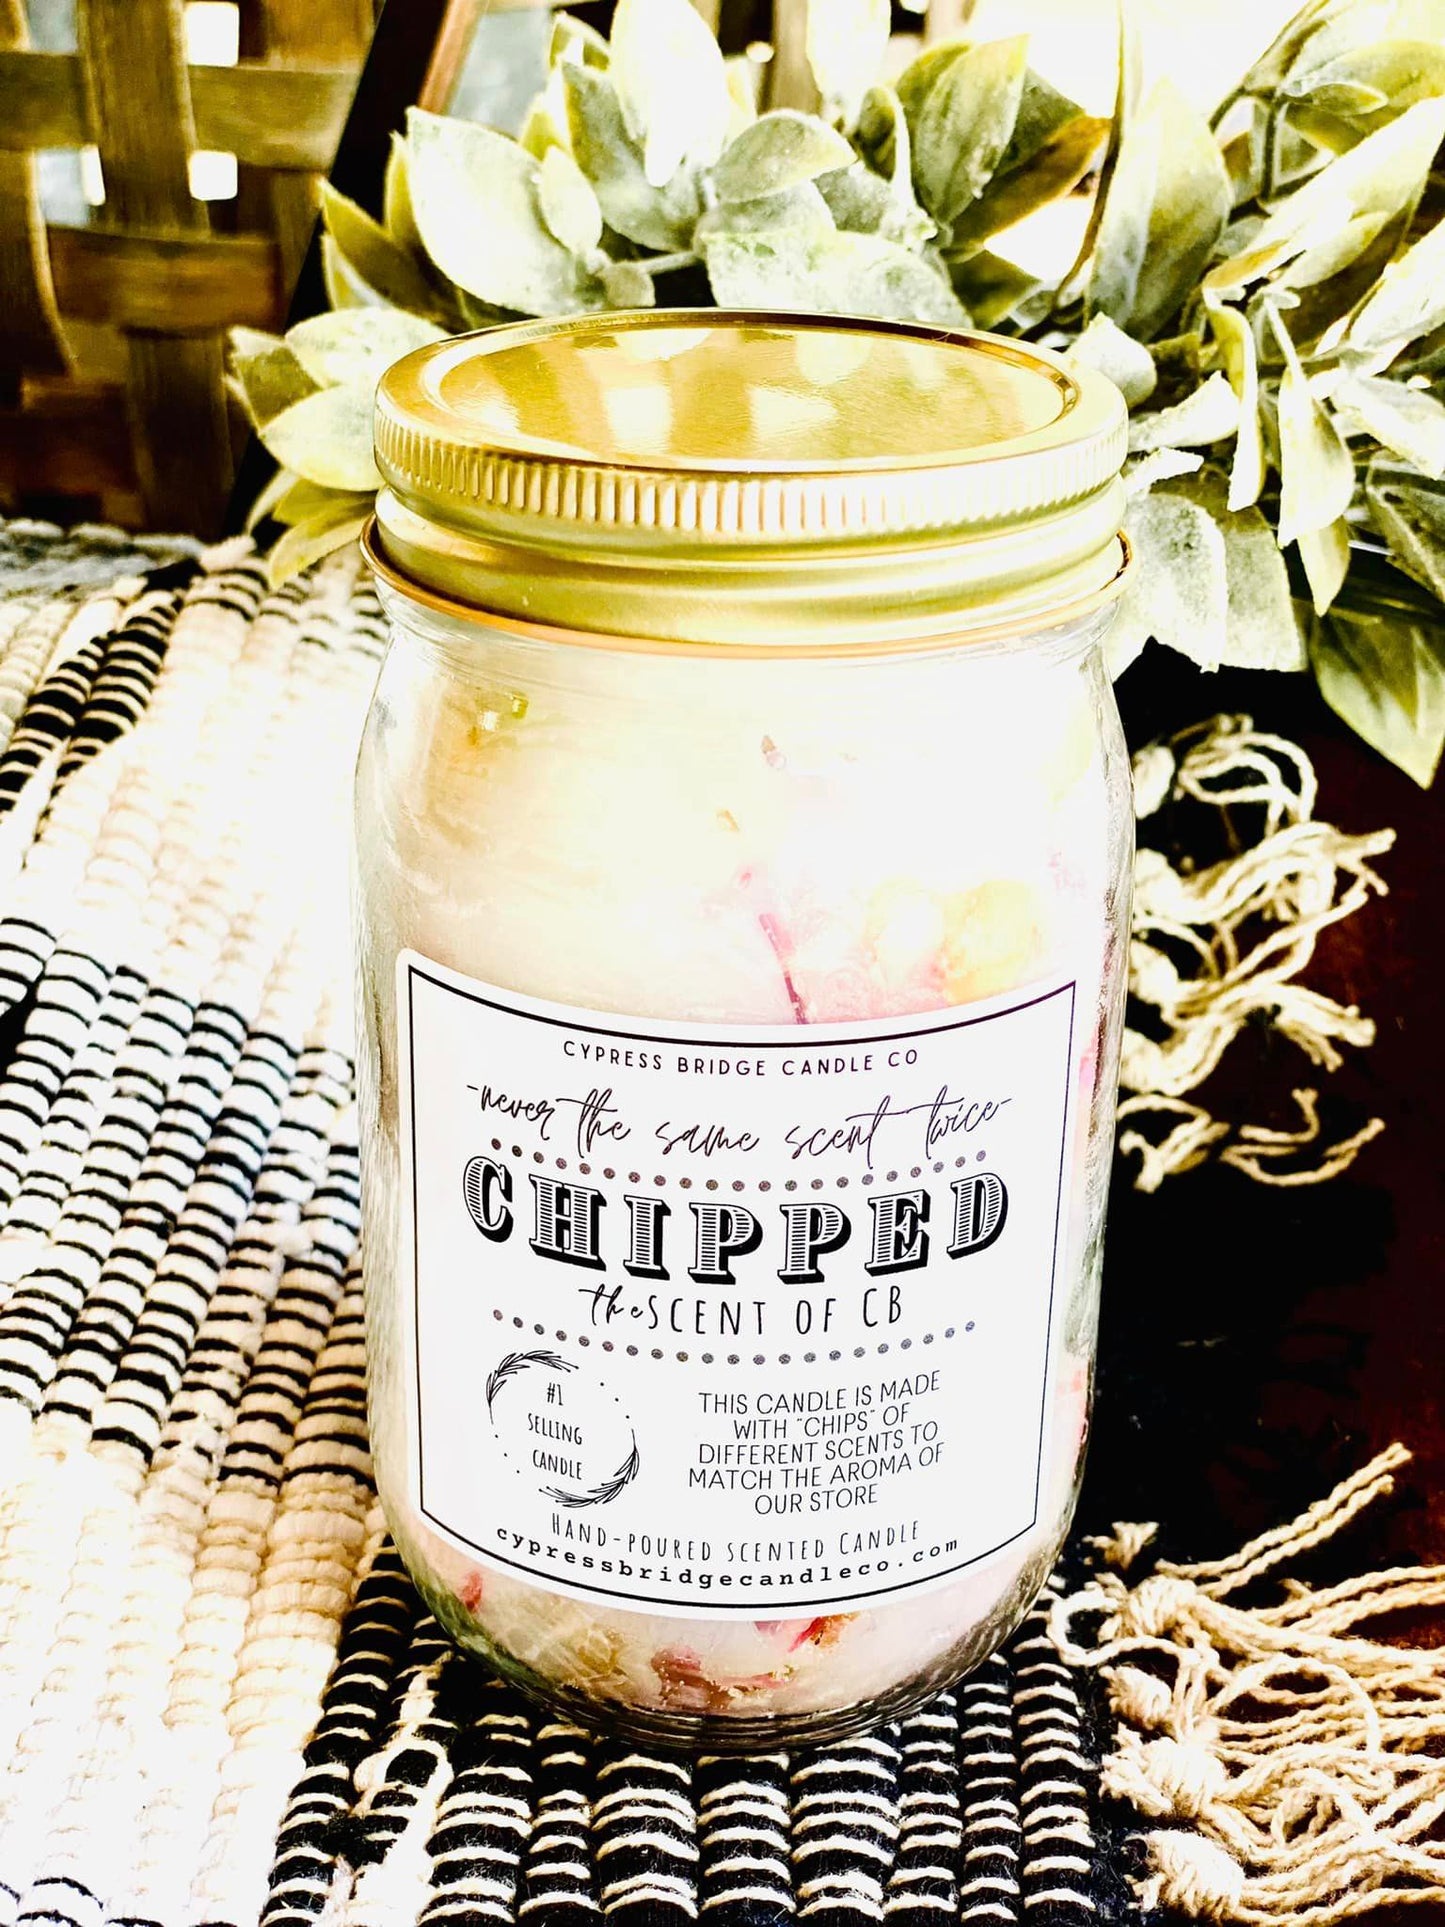 Scent of CB “CHIPPED™” 2 wick Jar Candle or Mason Jar